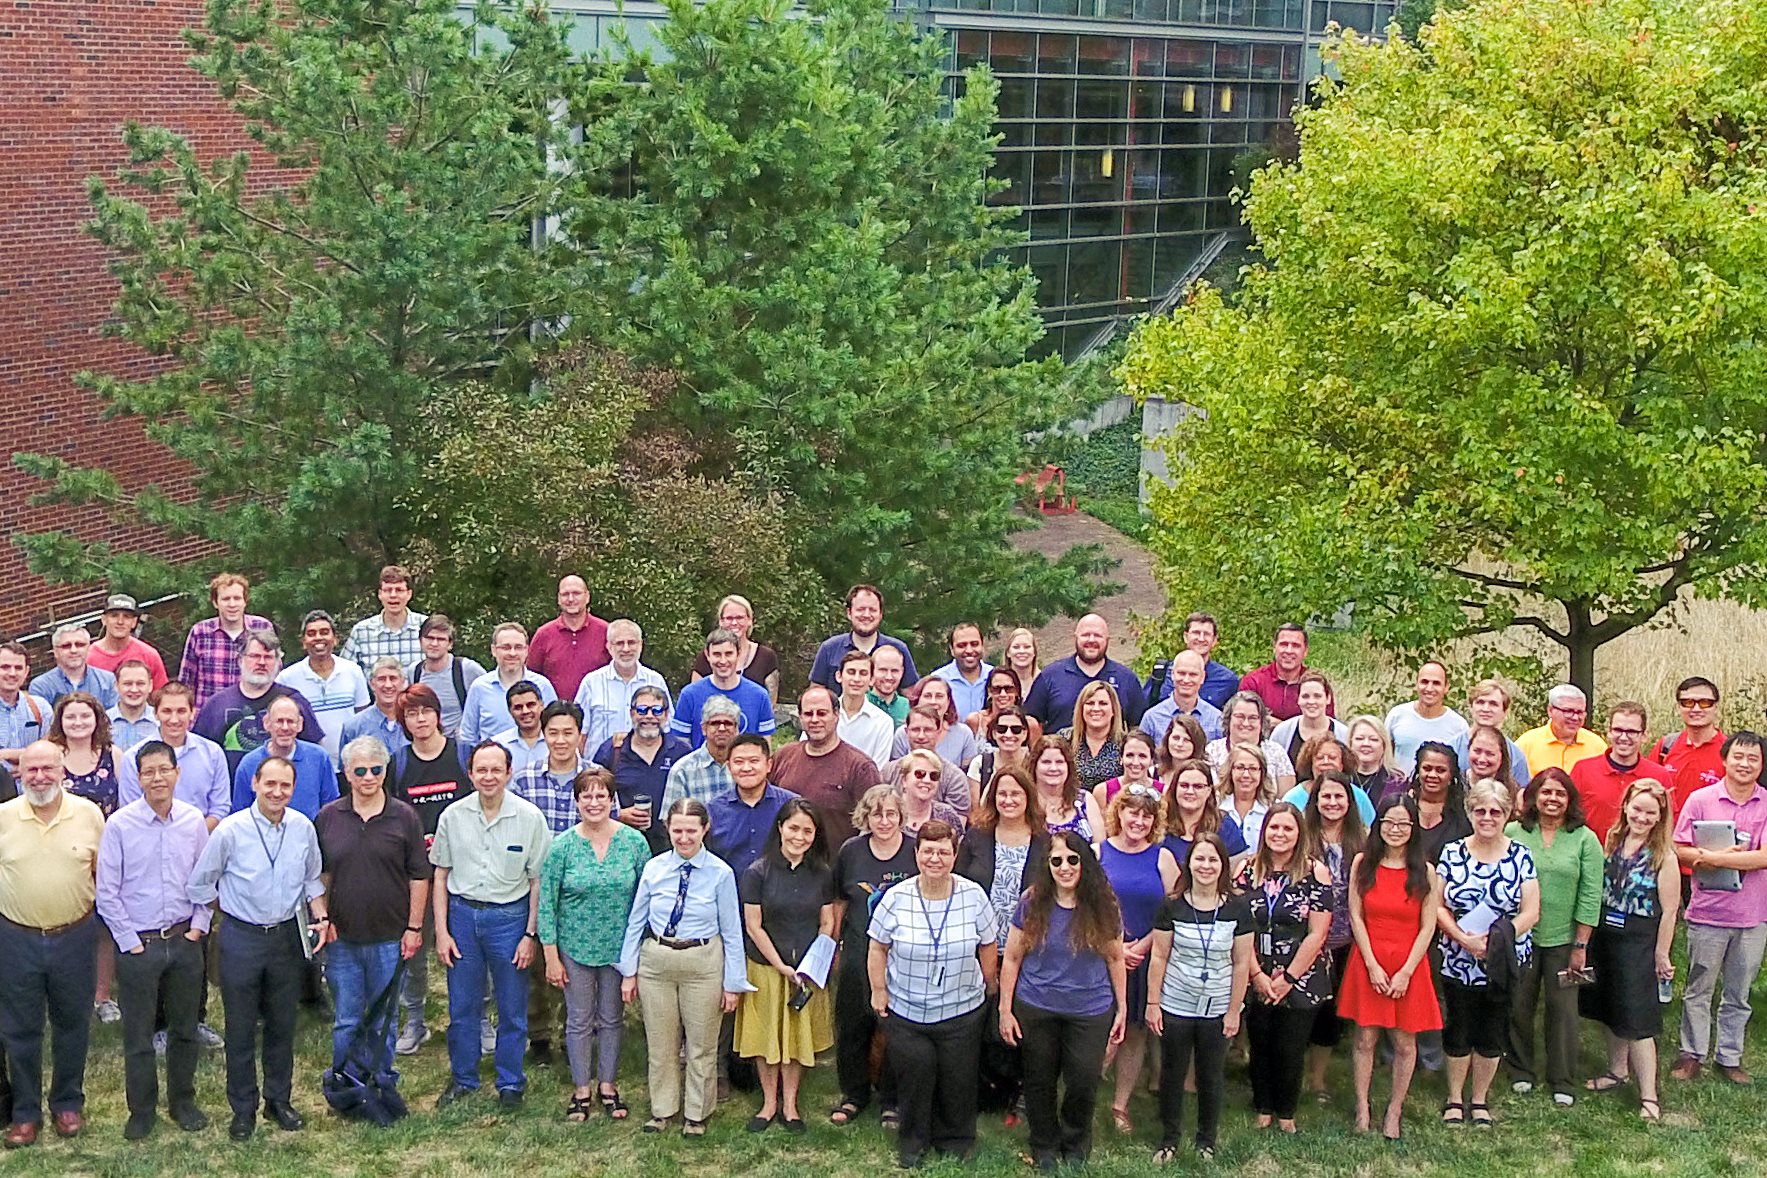 Illinois Computer Science faculty and staff in front of the Thomas M. Siebel Center for Computer Science.